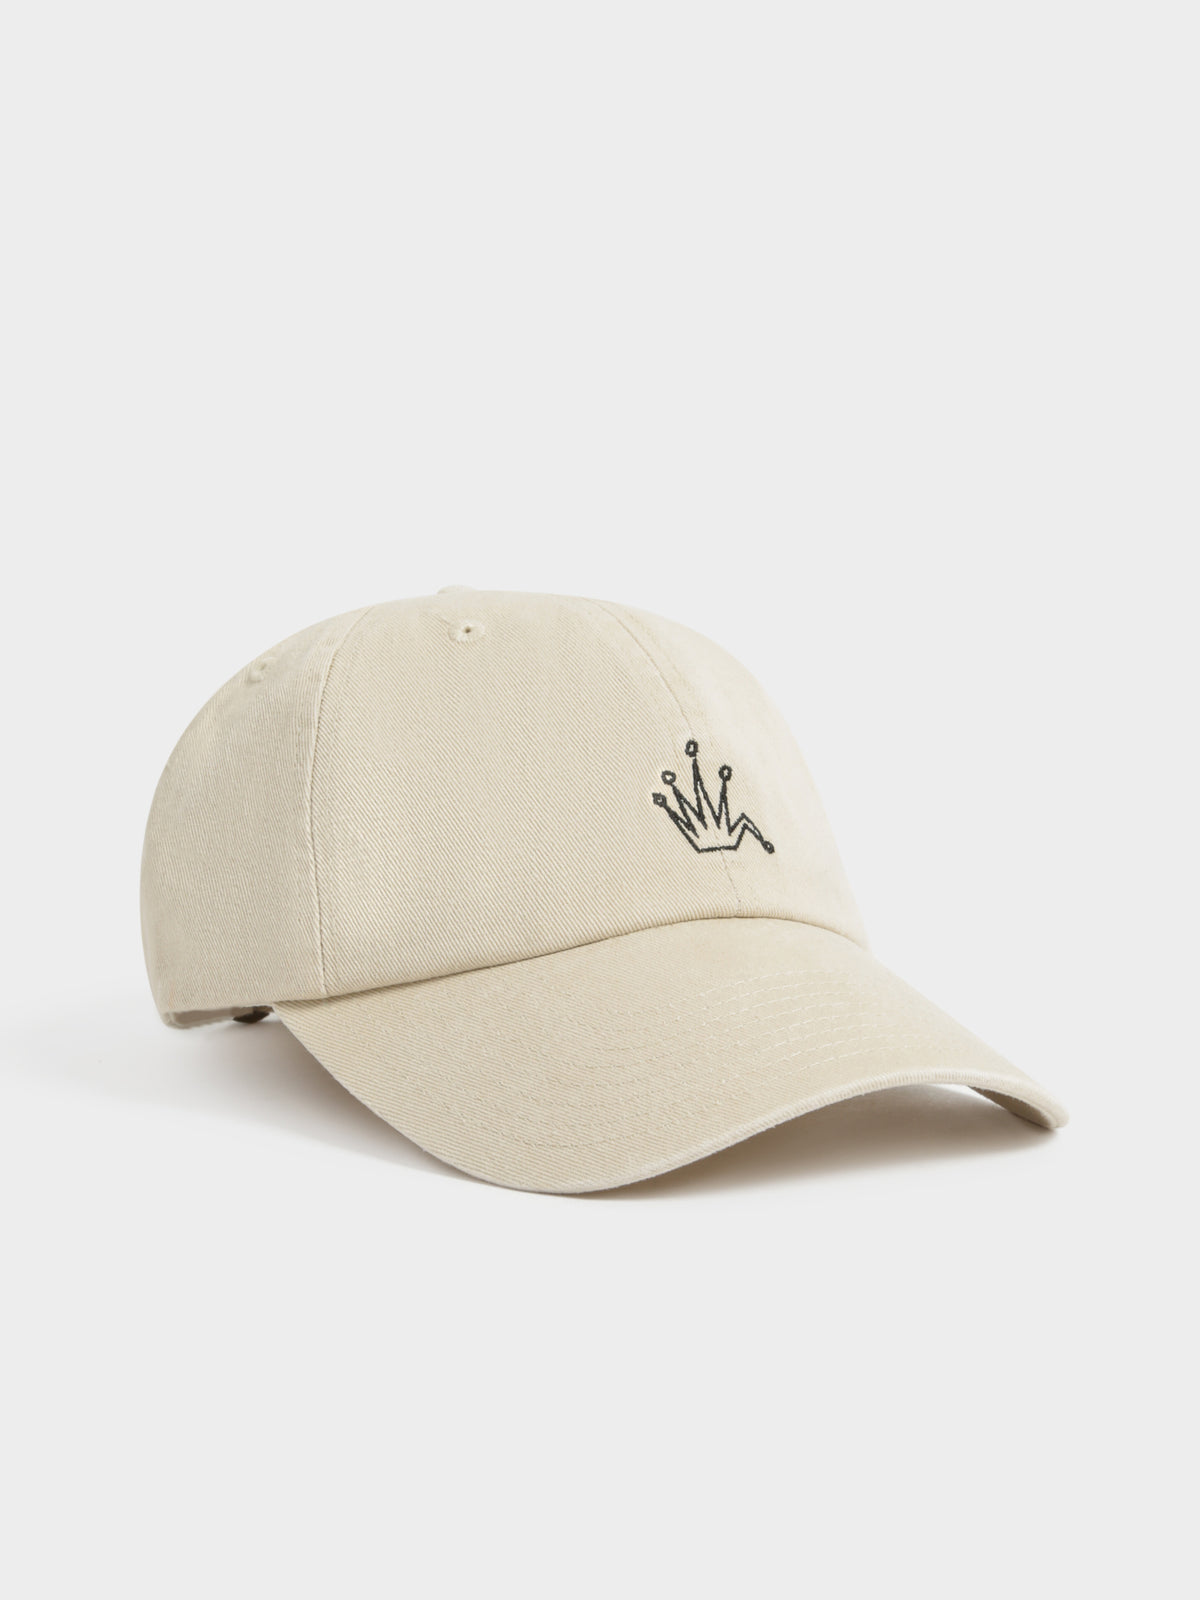 Embroidered Crown Stock Low-Pro Cap in White Sand